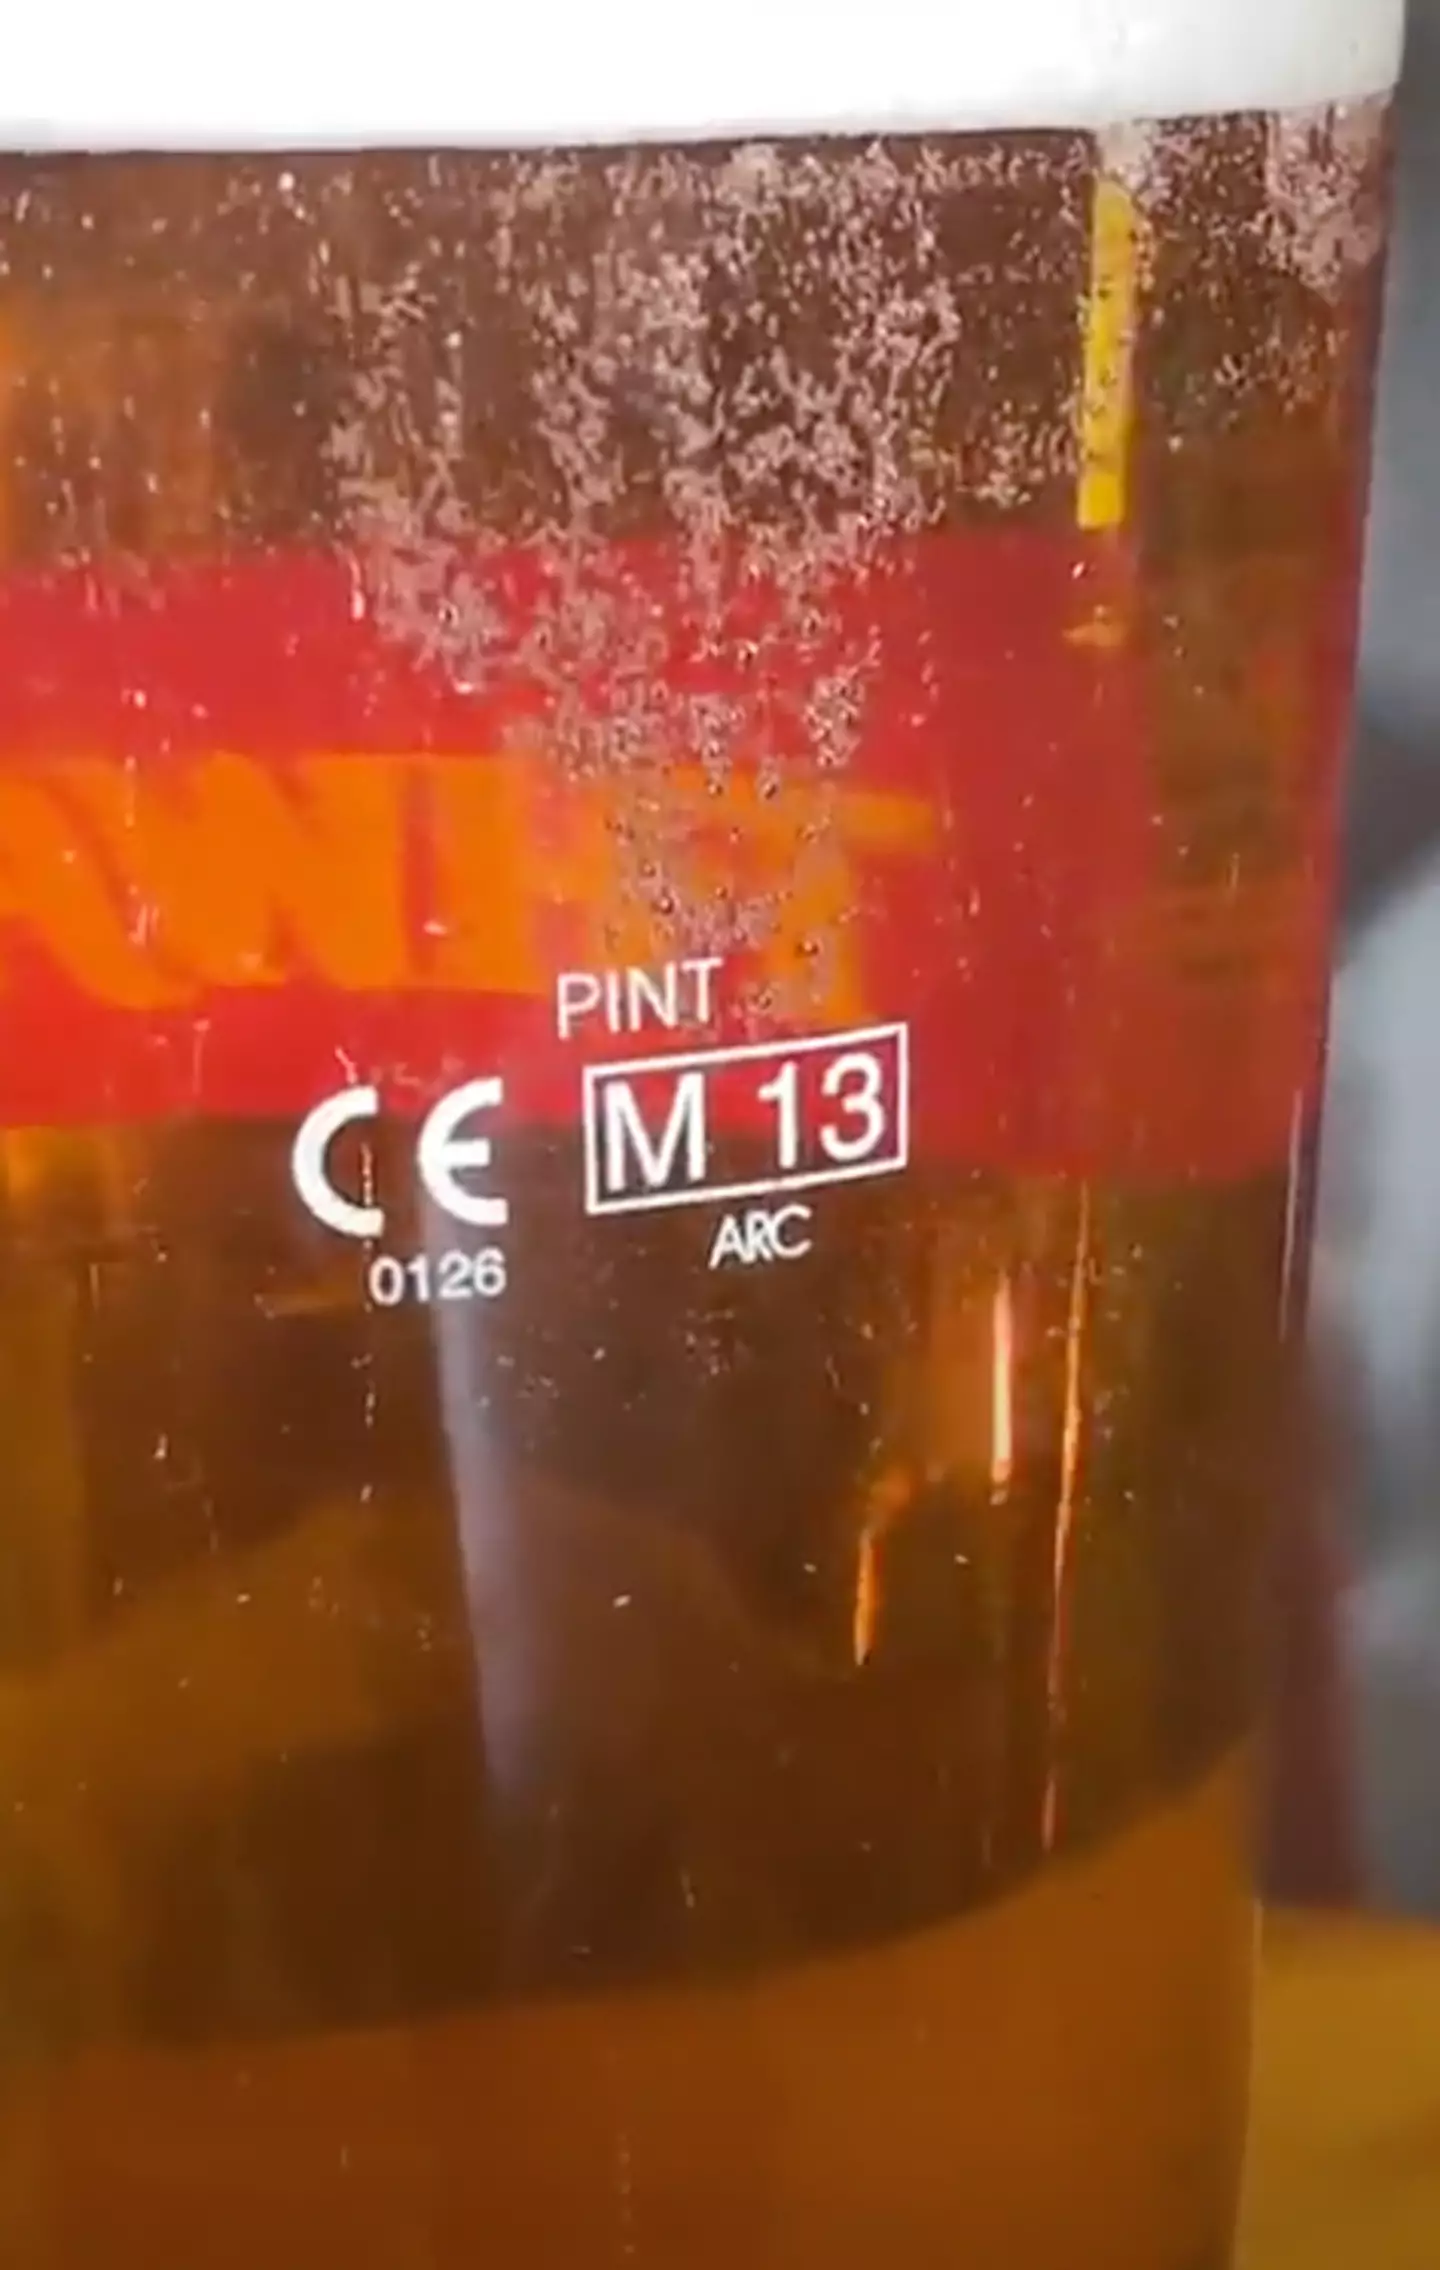 The numbers on pint glasses actually mean something, believe it or not.